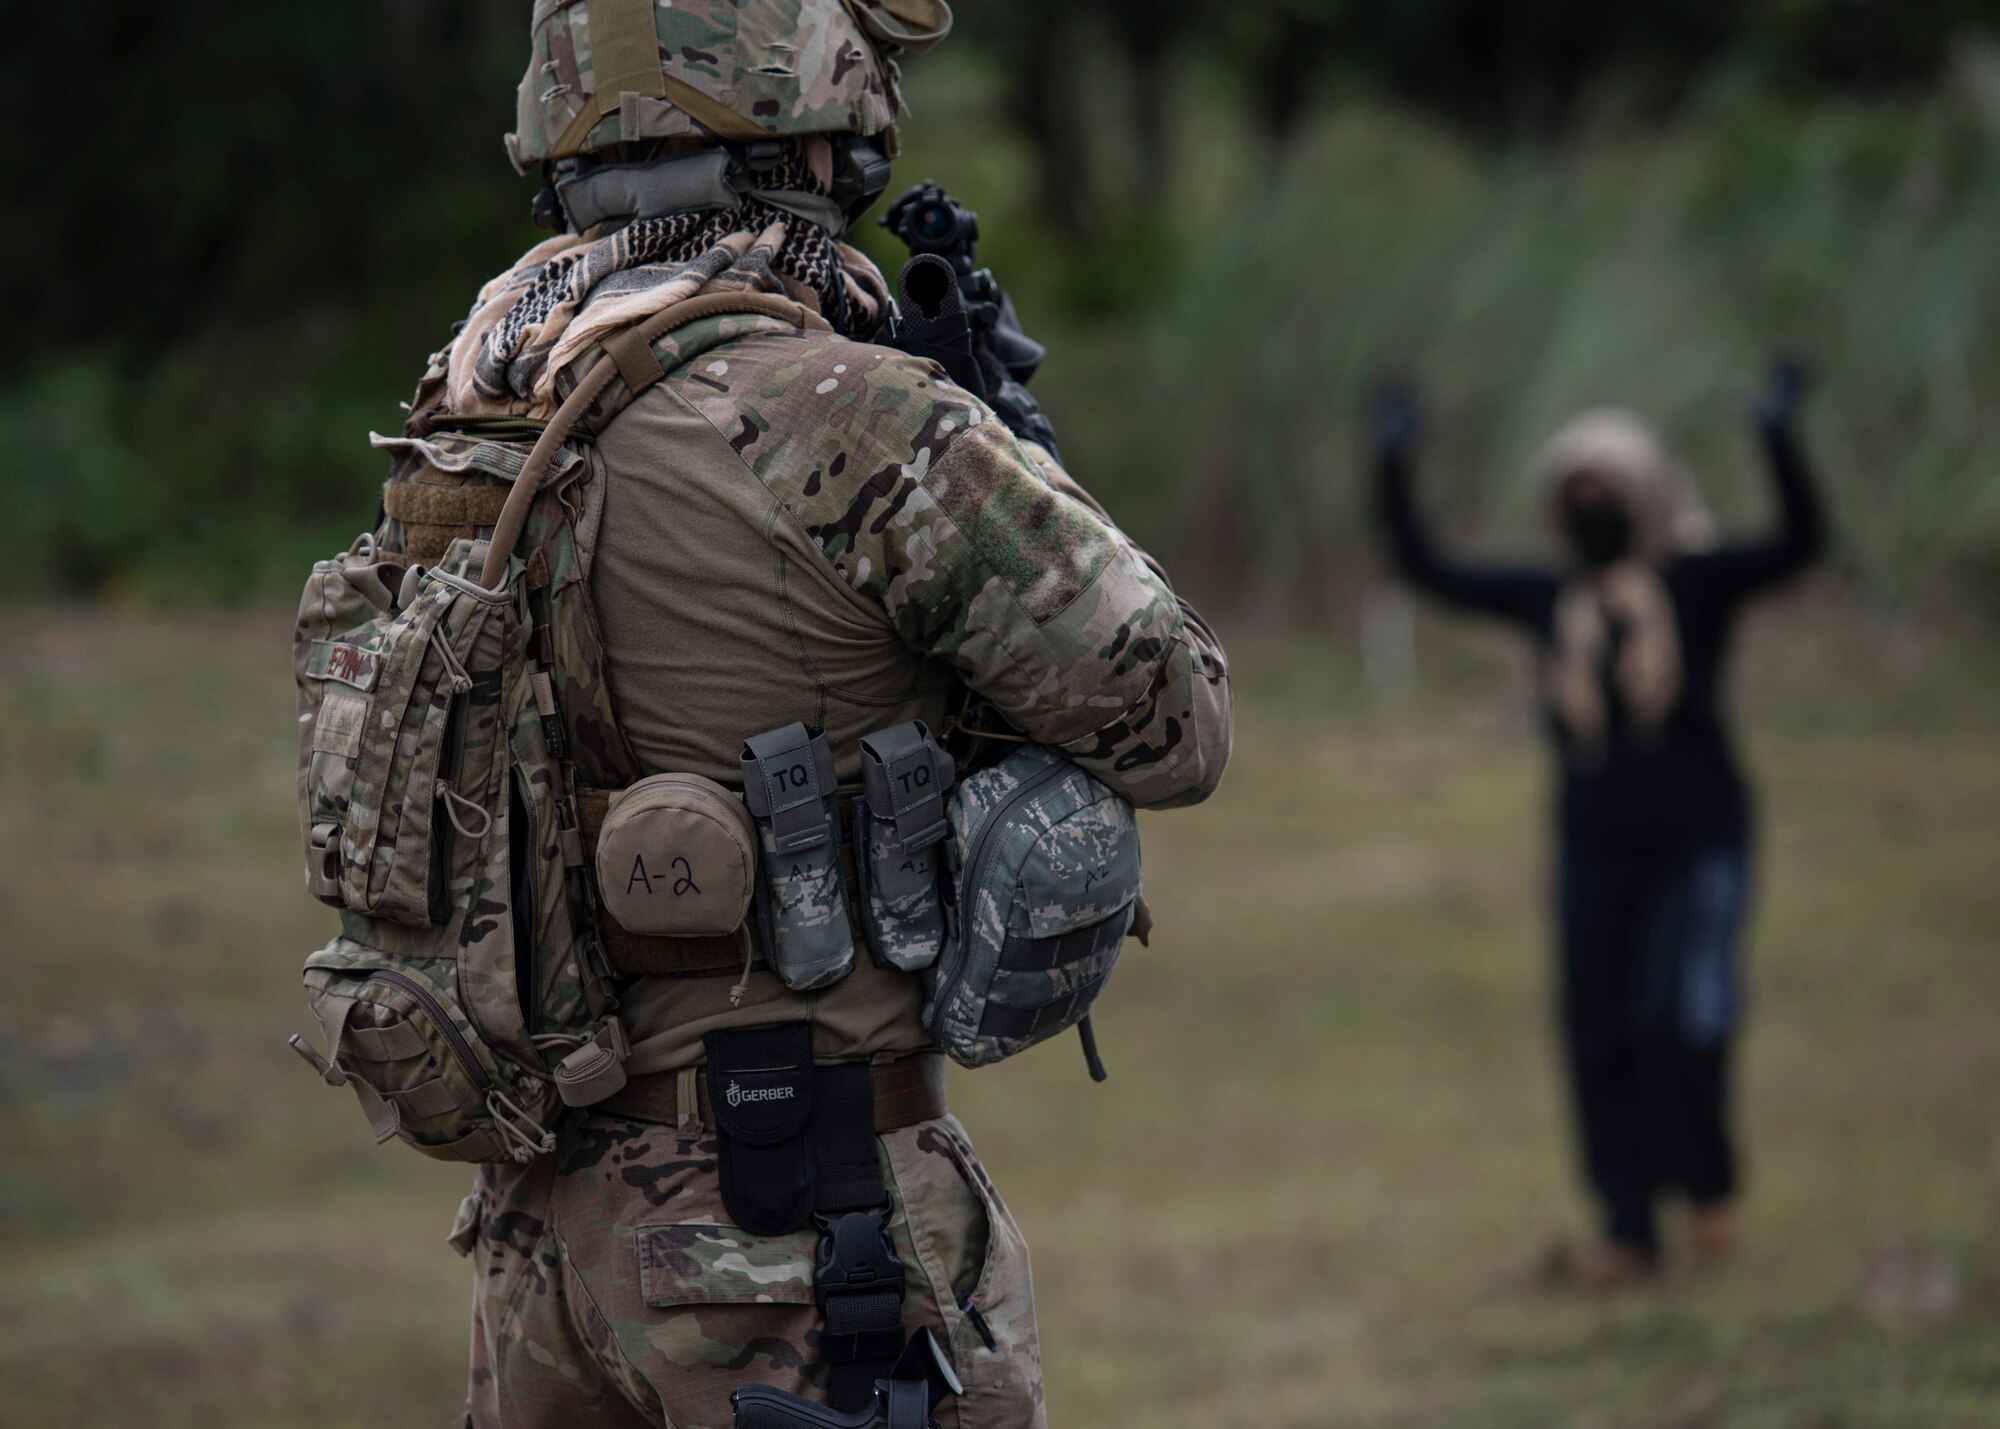 U.S. Air Force Technical Sgt. Adam Pepin, 644th Combat Communications Squadron, apprehends a member of the opposition force during Exercise Dragon Shield at Northwest Field, Guam, January 13, 2021.